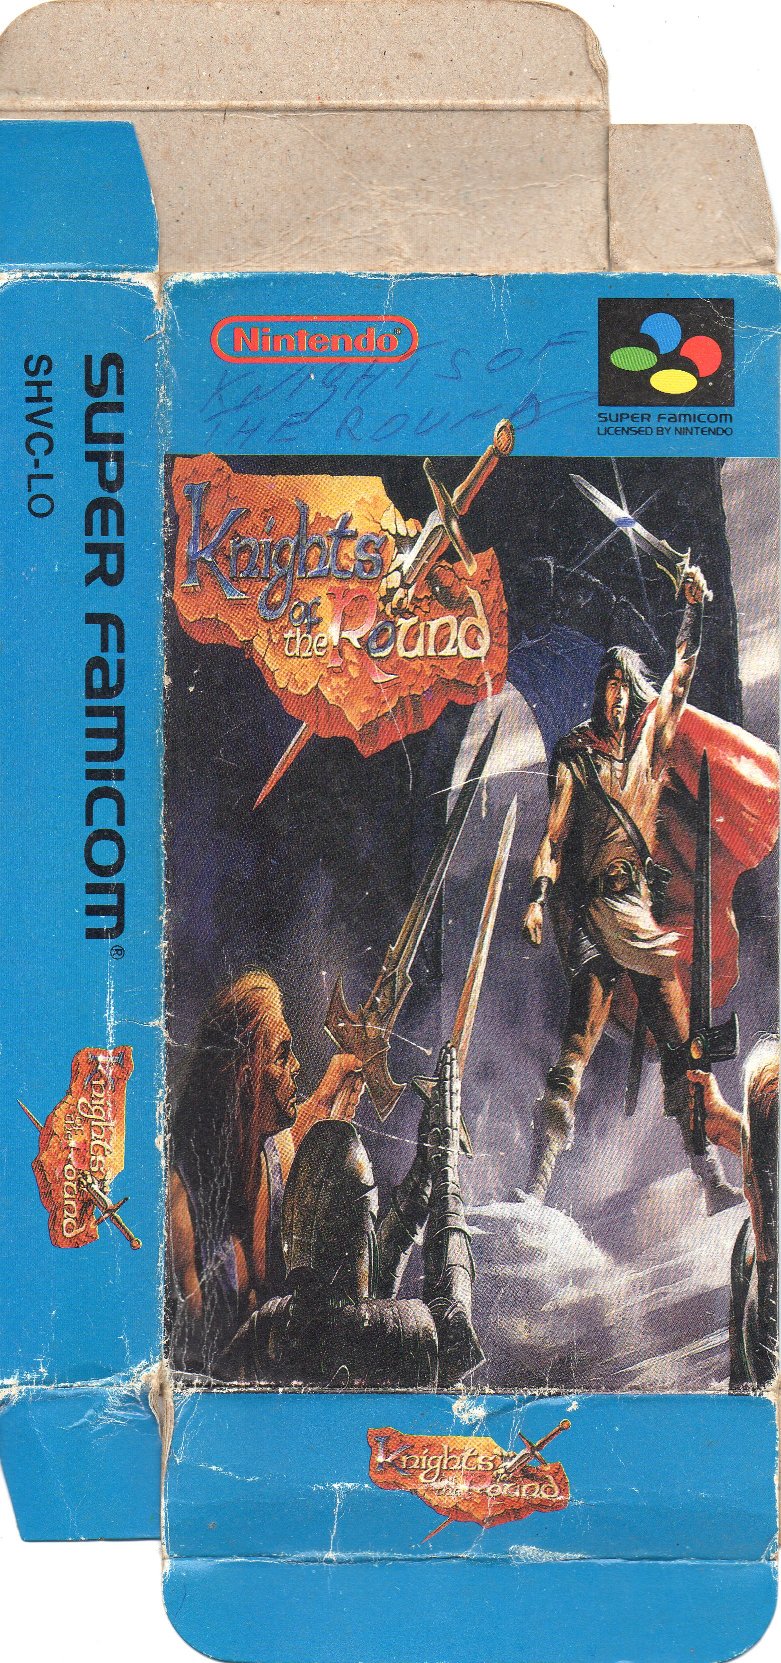 Large scan of the box (front)